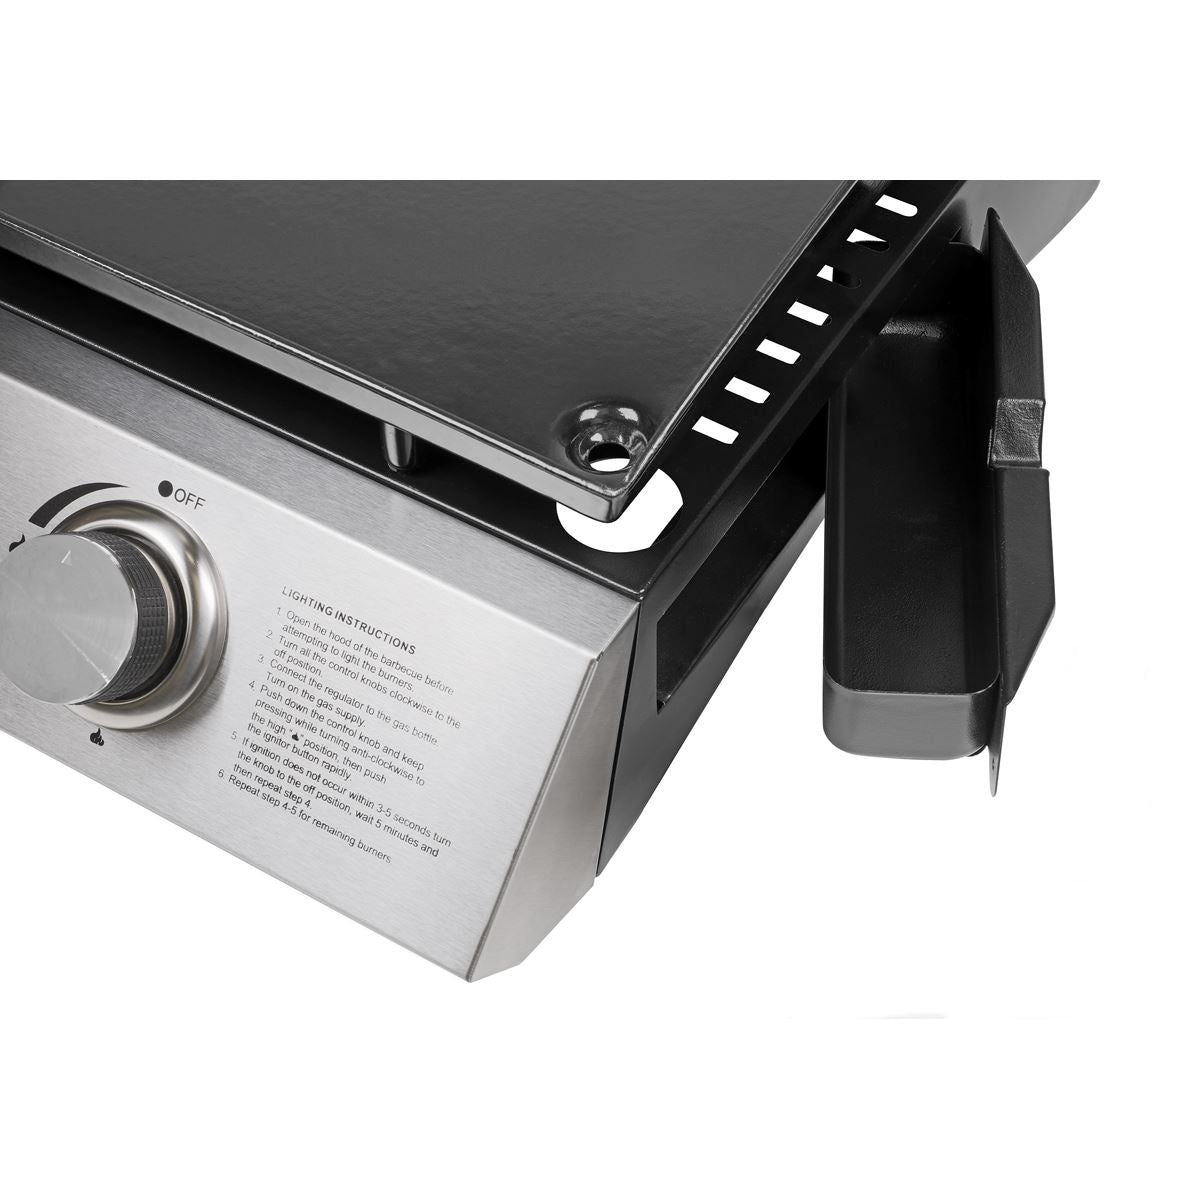 Dellonda 3 Burner Portable Gas Plancha 7.5kW BBQ Griddle, Stainless Steel